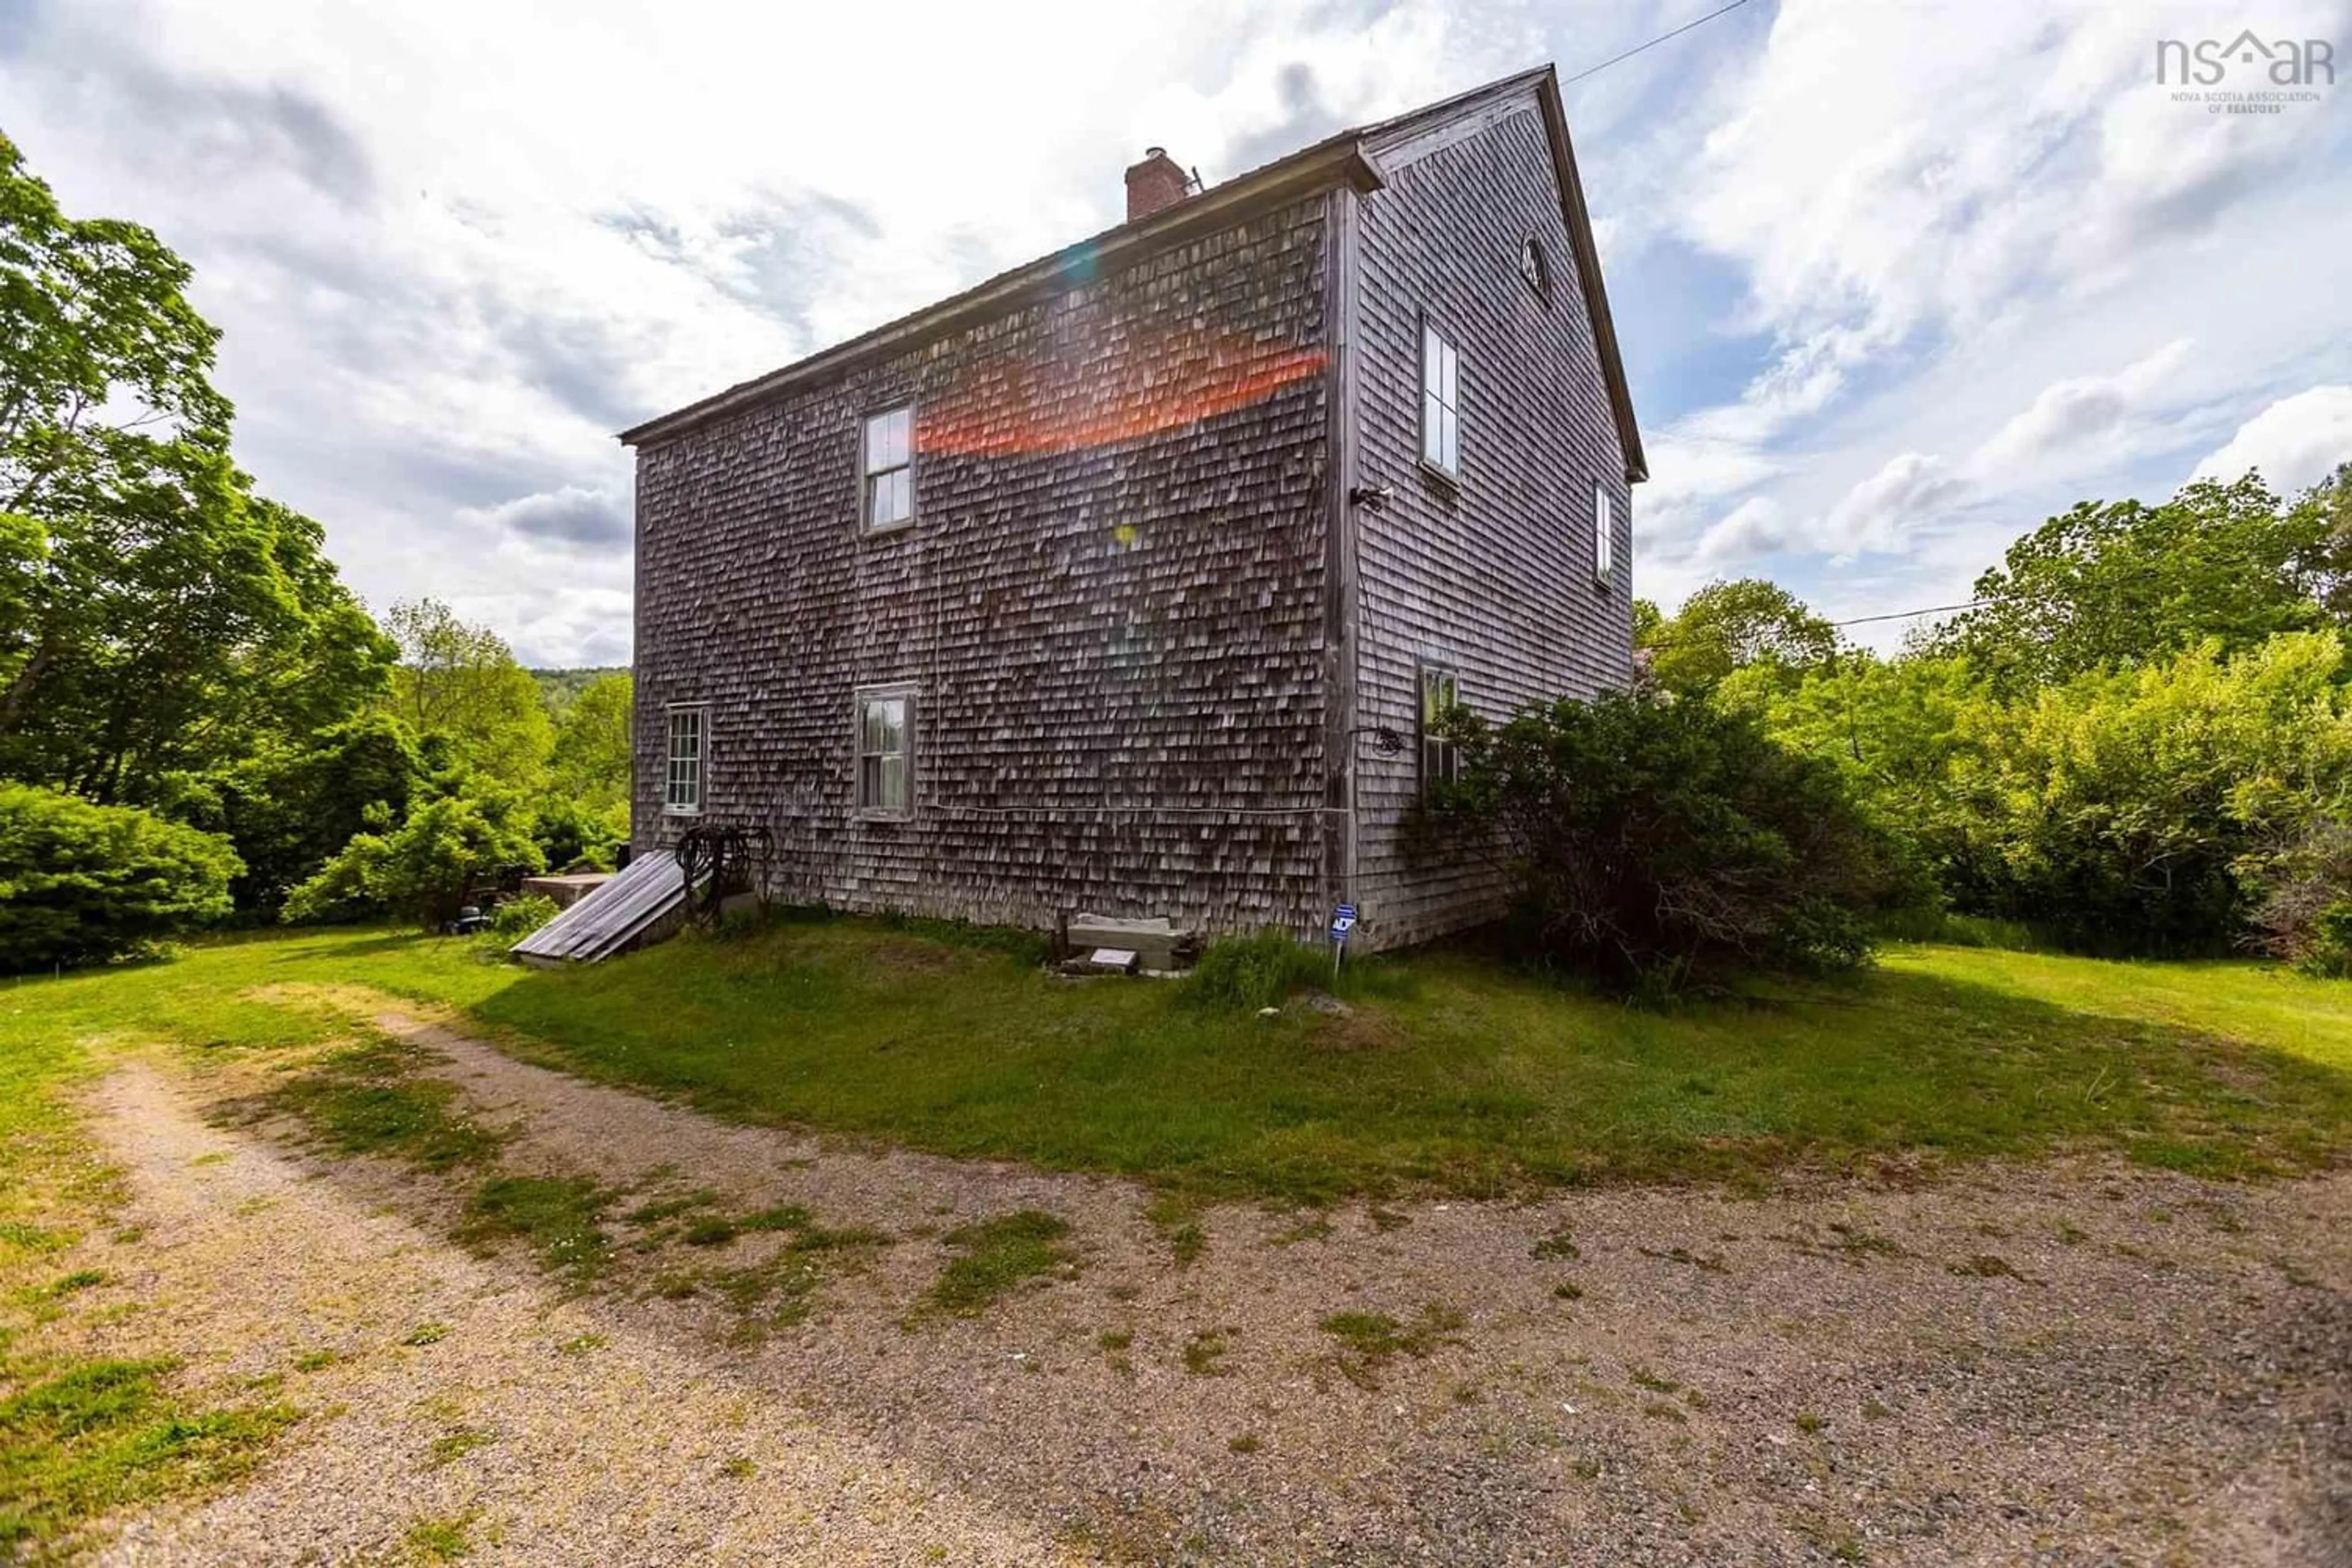 Cottage for 9427 Highway 8, Lequille Nova Scotia B0S 1A0